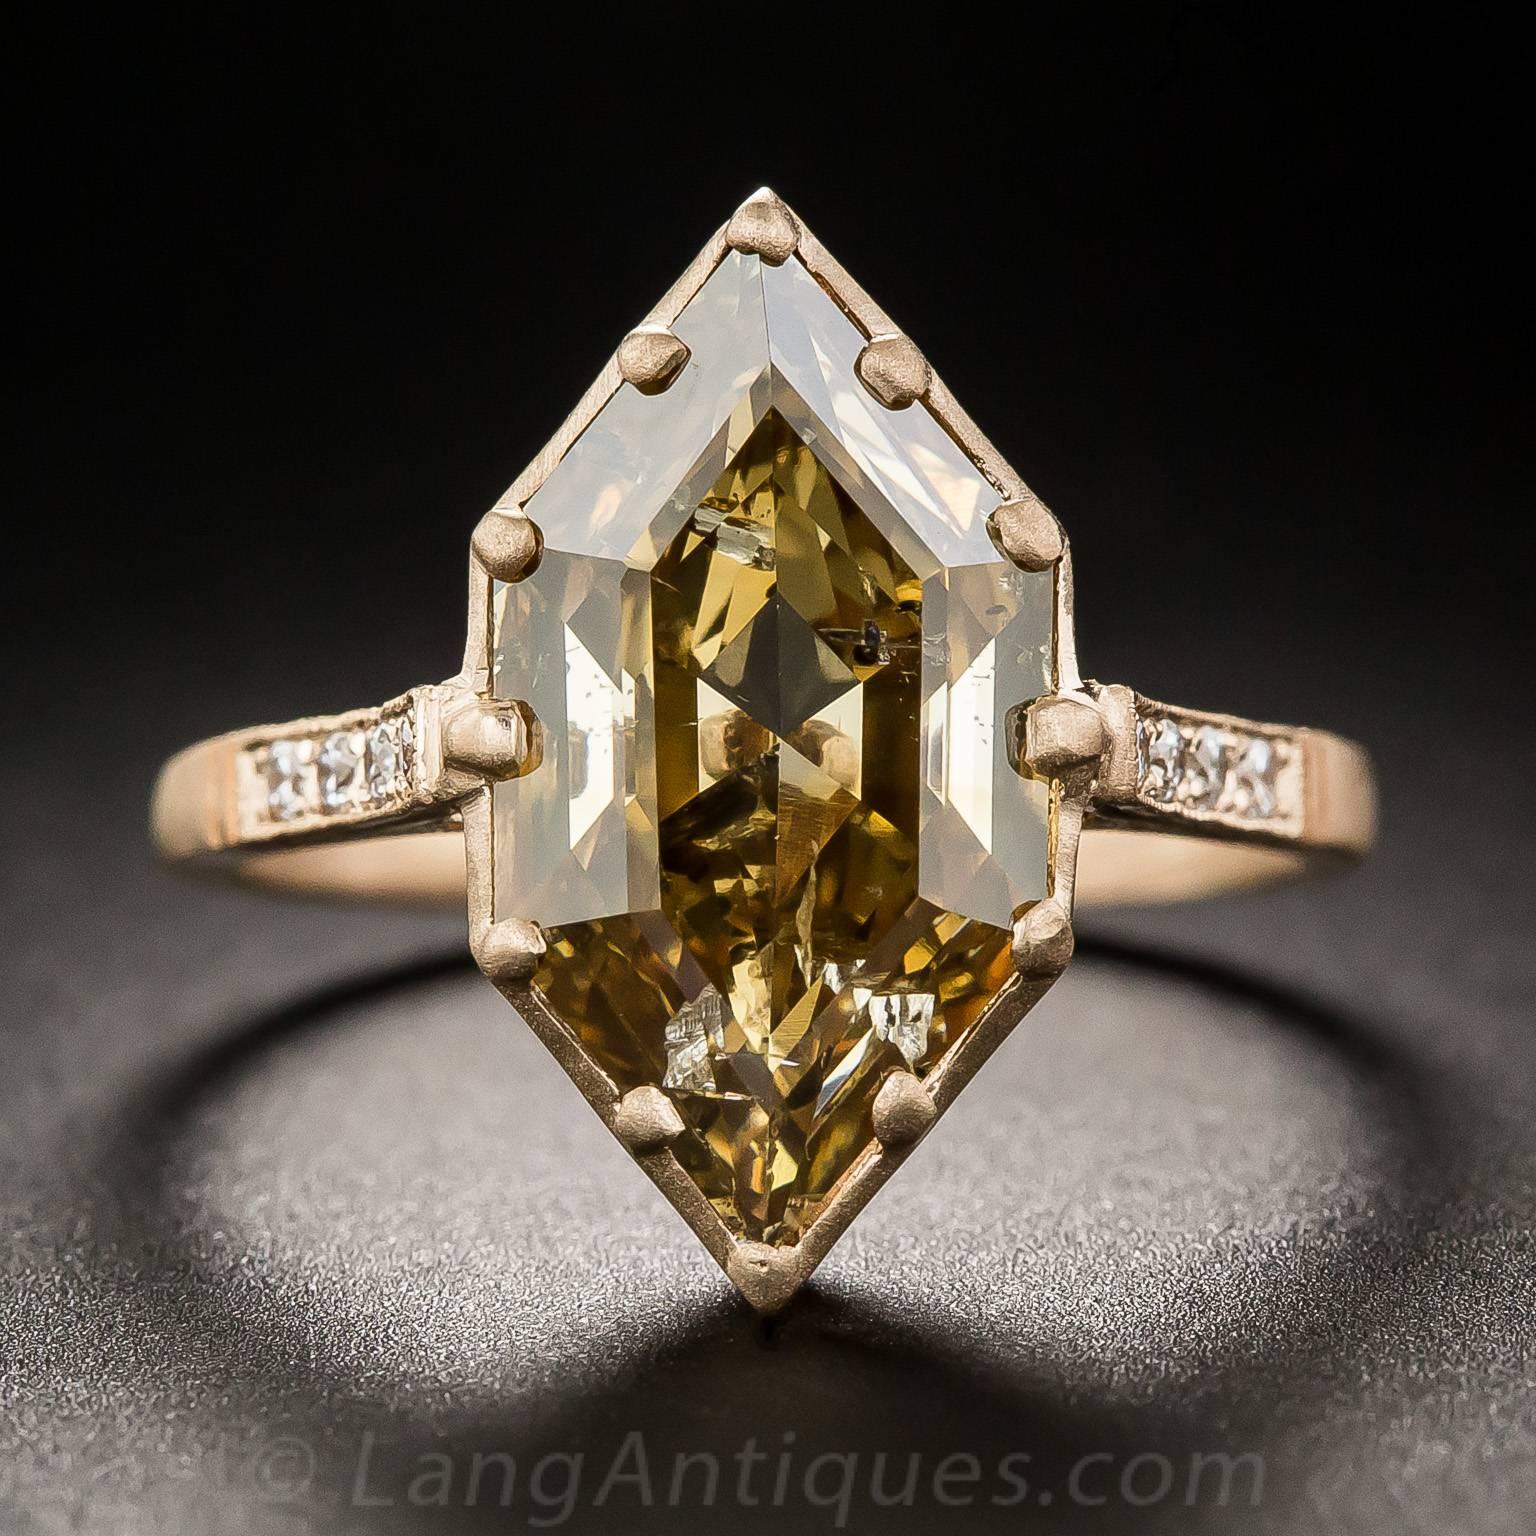 This uniquely striking and impressive dazzler features a rare and wonderful elongated hexagonal-cut diamond, weighing 3.43 carats, suffused with a fascinating cognac colored glow. Measuring 5/8 inch long, the diamond radiates with minimal